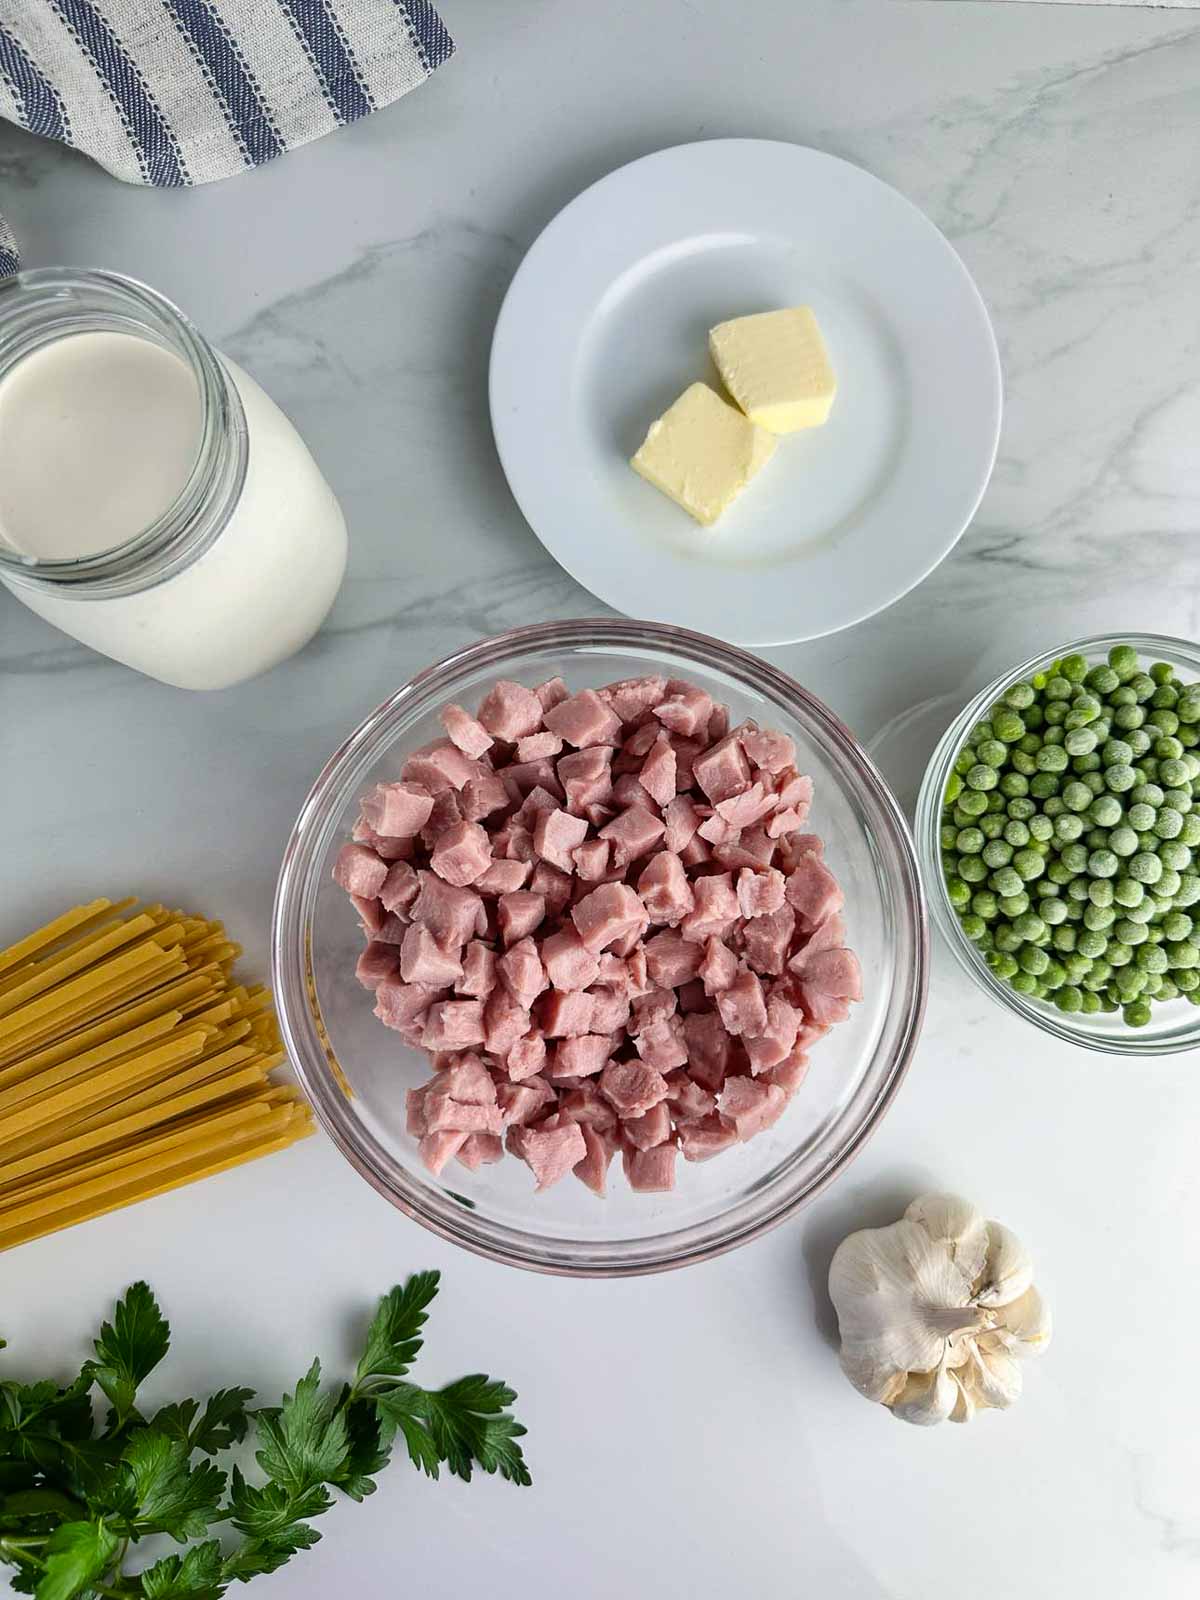 Ingredients for ham and pea pasta: pasta, heavy cream, Parmesan cheese, butter, garlic, ham, and peas